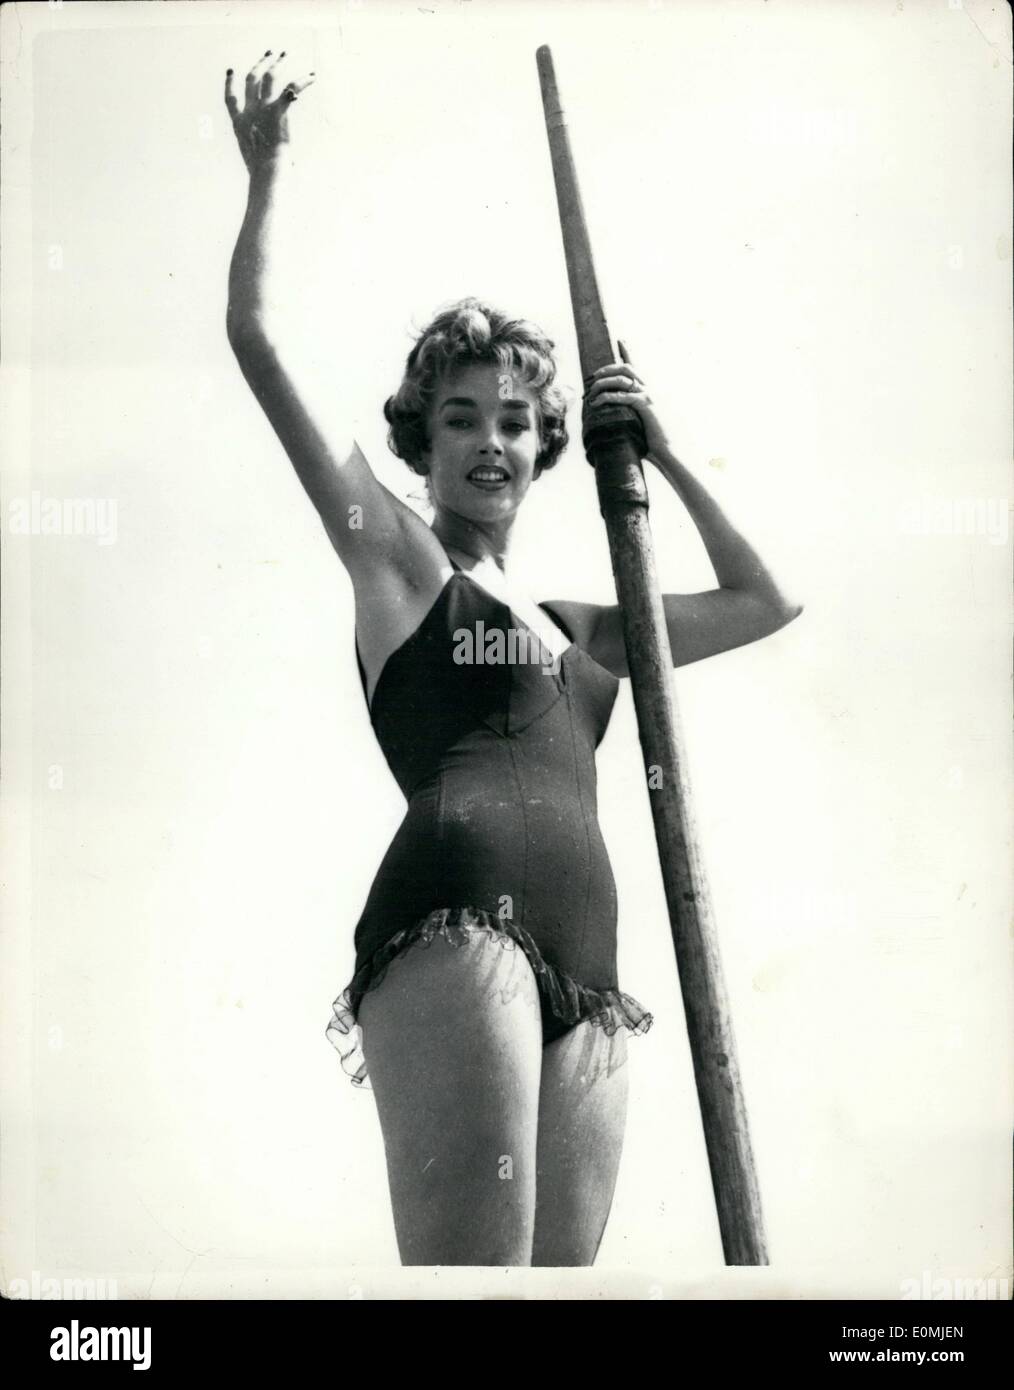 Sep. 09, 1955 - Dawn Addams (princess Massing) at the Venice film festival. Screen star Dawn Addams - wife of Italy's prince Missino- poses for the camera in her bathing suit - on the beach at Venice where she is attending the international film festival. Stock Photo